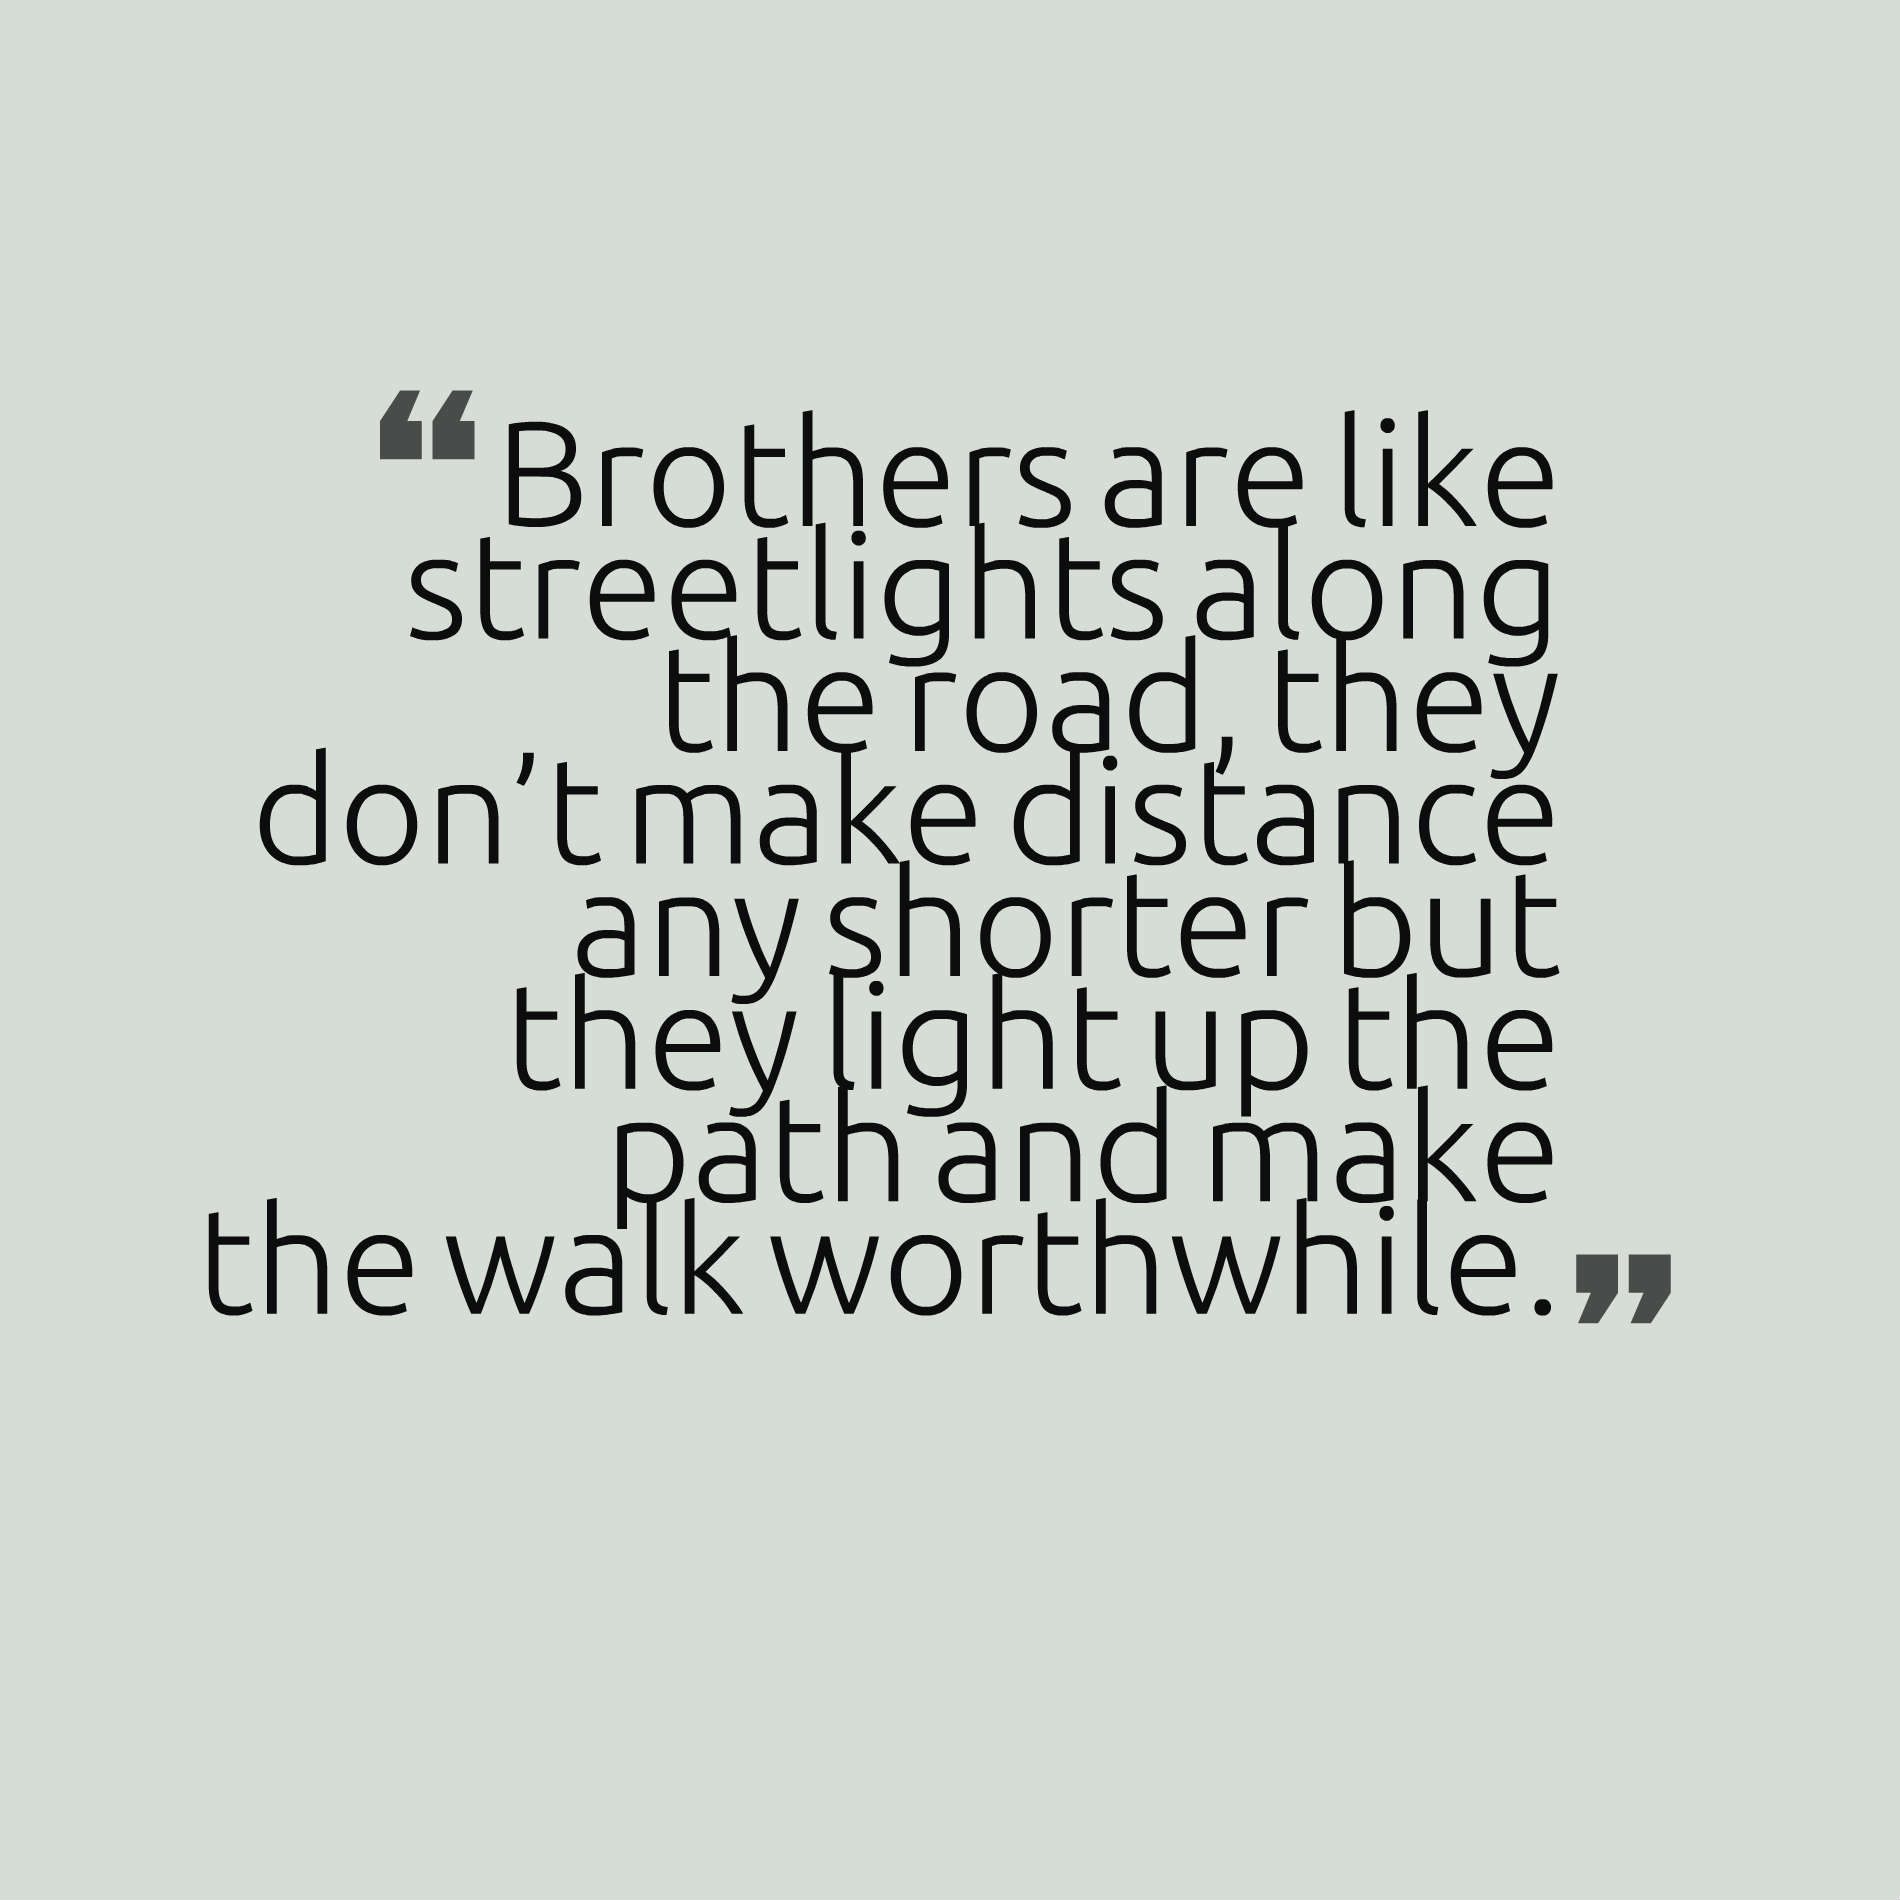 Brothers are like streetlights along the road, they don’t make distance any shorter but they light up the path and make the walk worthwhile.